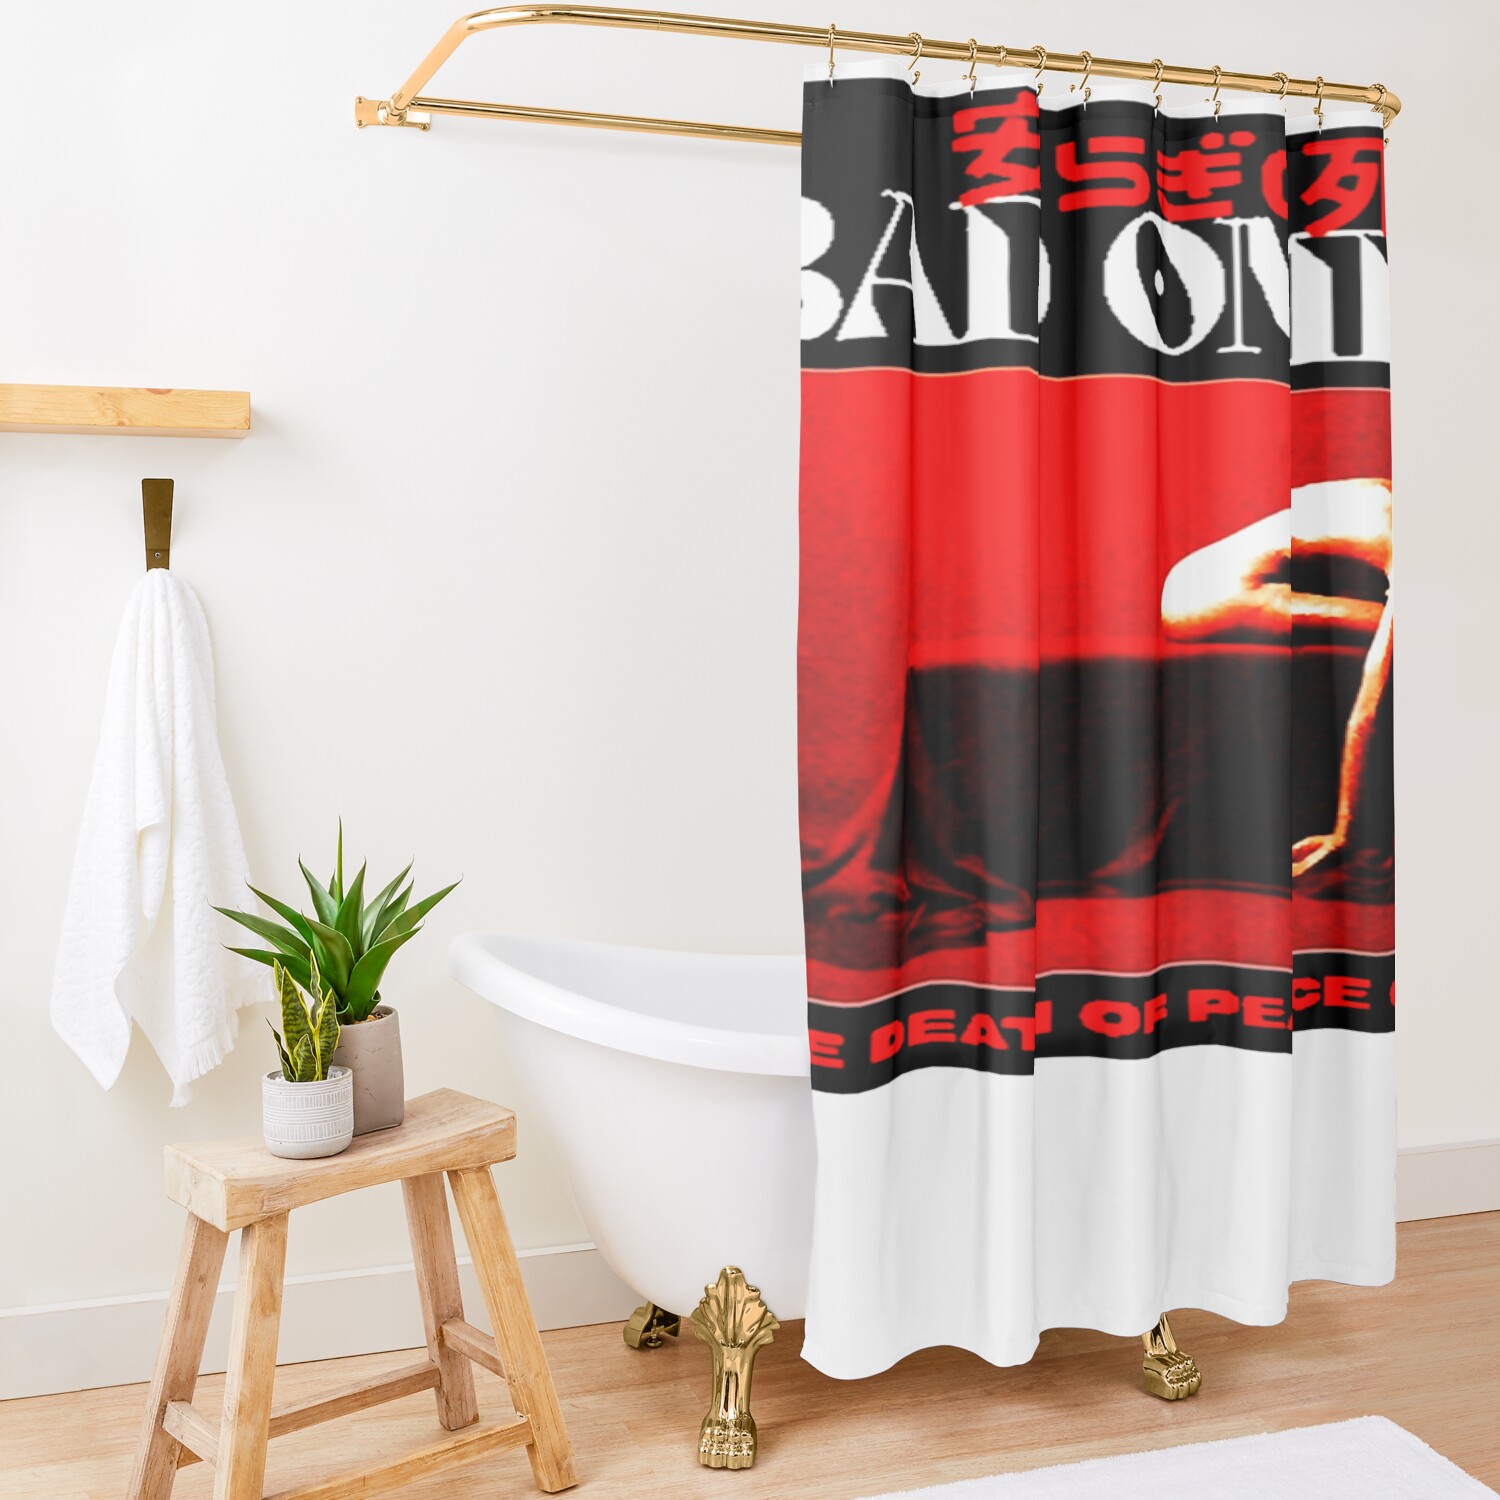 urshower curtain opensquare1500x1500 13 - Bad Omens Shop